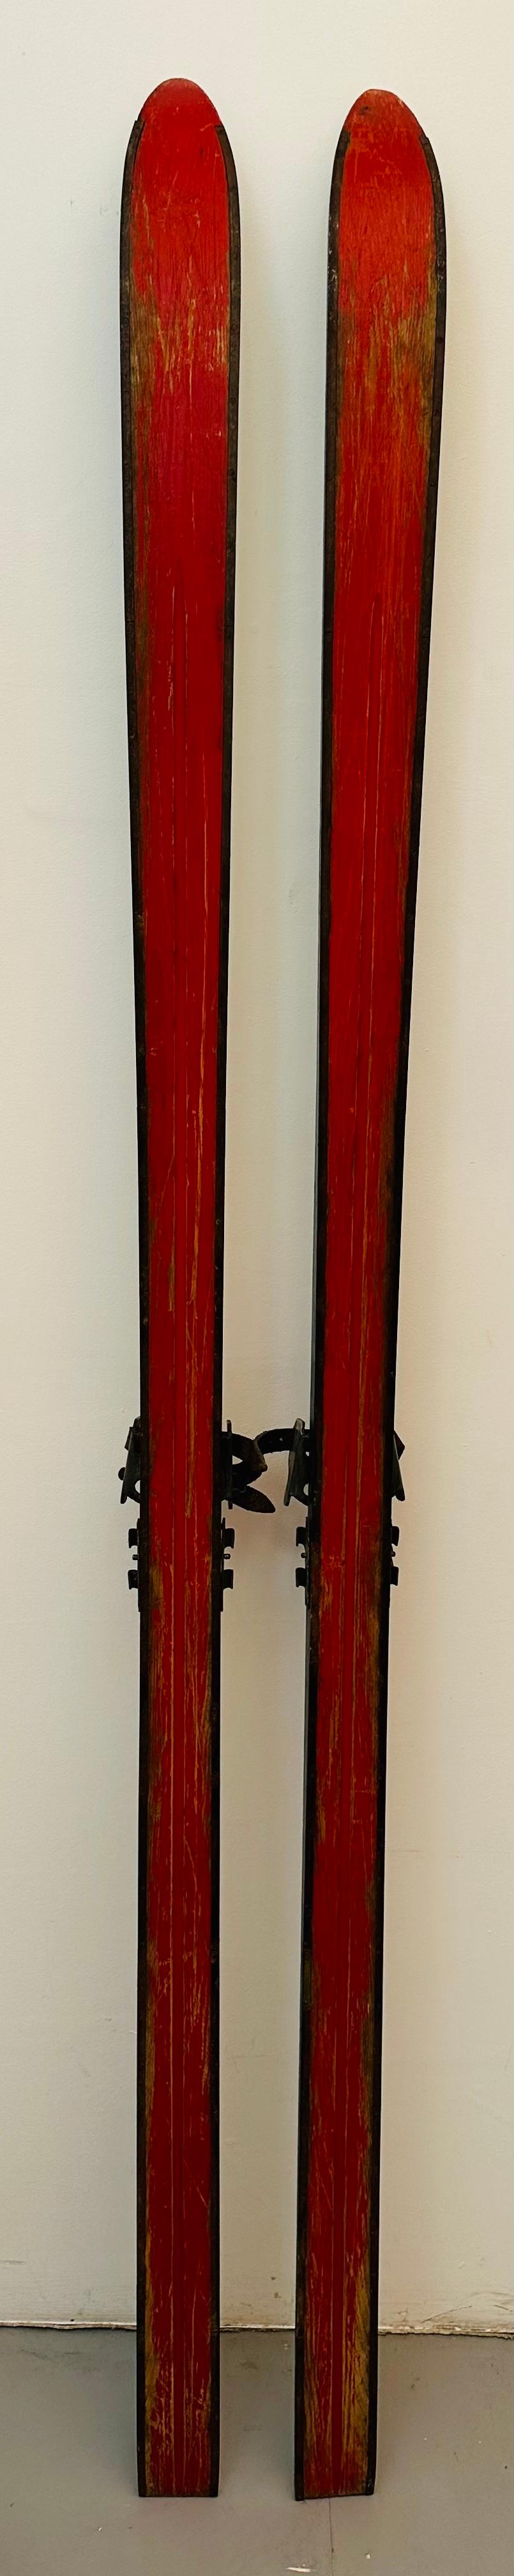 Pair of vintage German Spezial Schichten Hohnberg wooden skis with bindings.  In good vintage used condition considering their age which I believe to be around 1950s but maybe older.

For decoration purposes only in both a residential or commercial